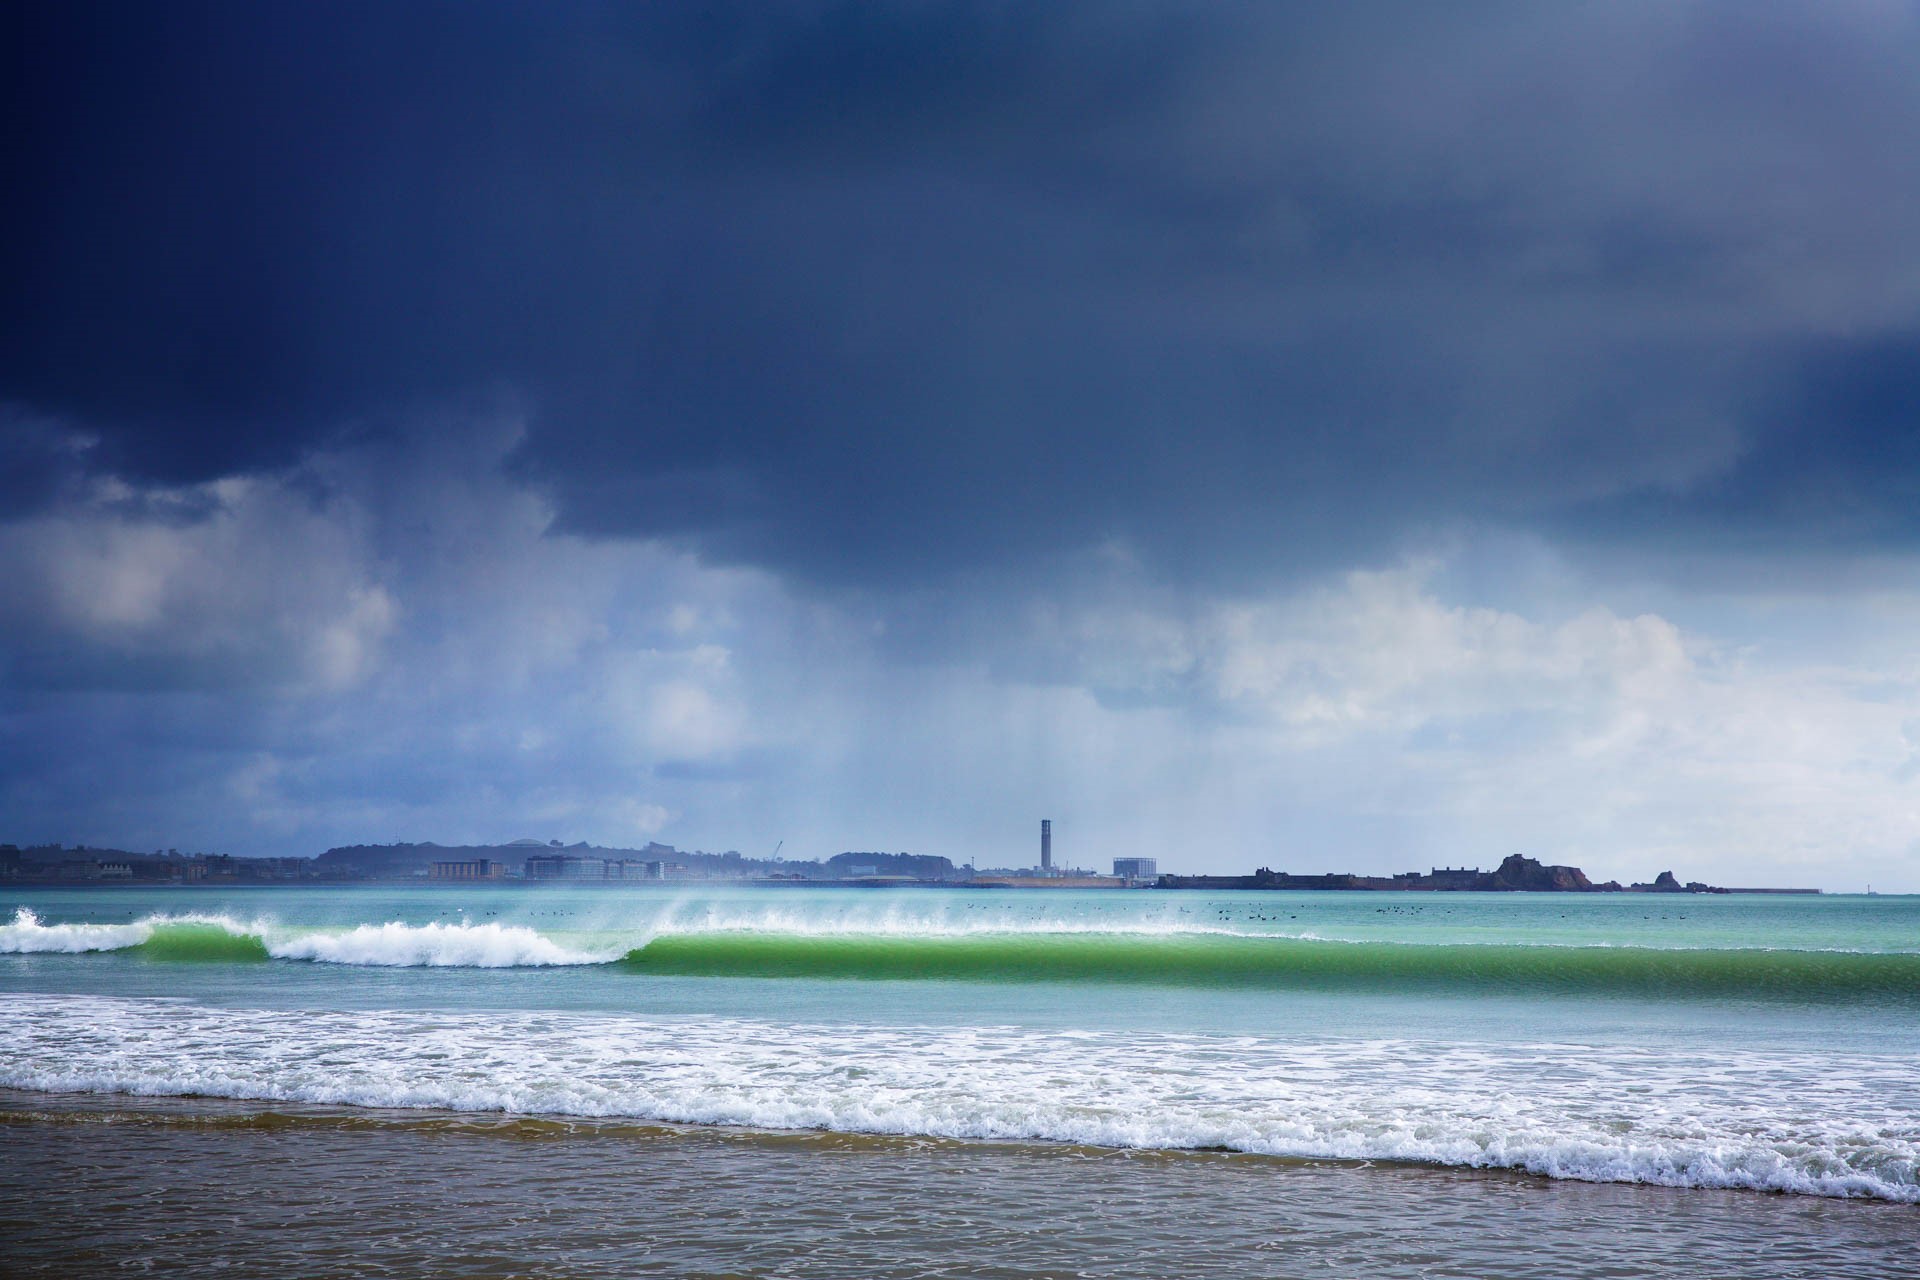 Small waves and stormy skies at St Aubin's Bay